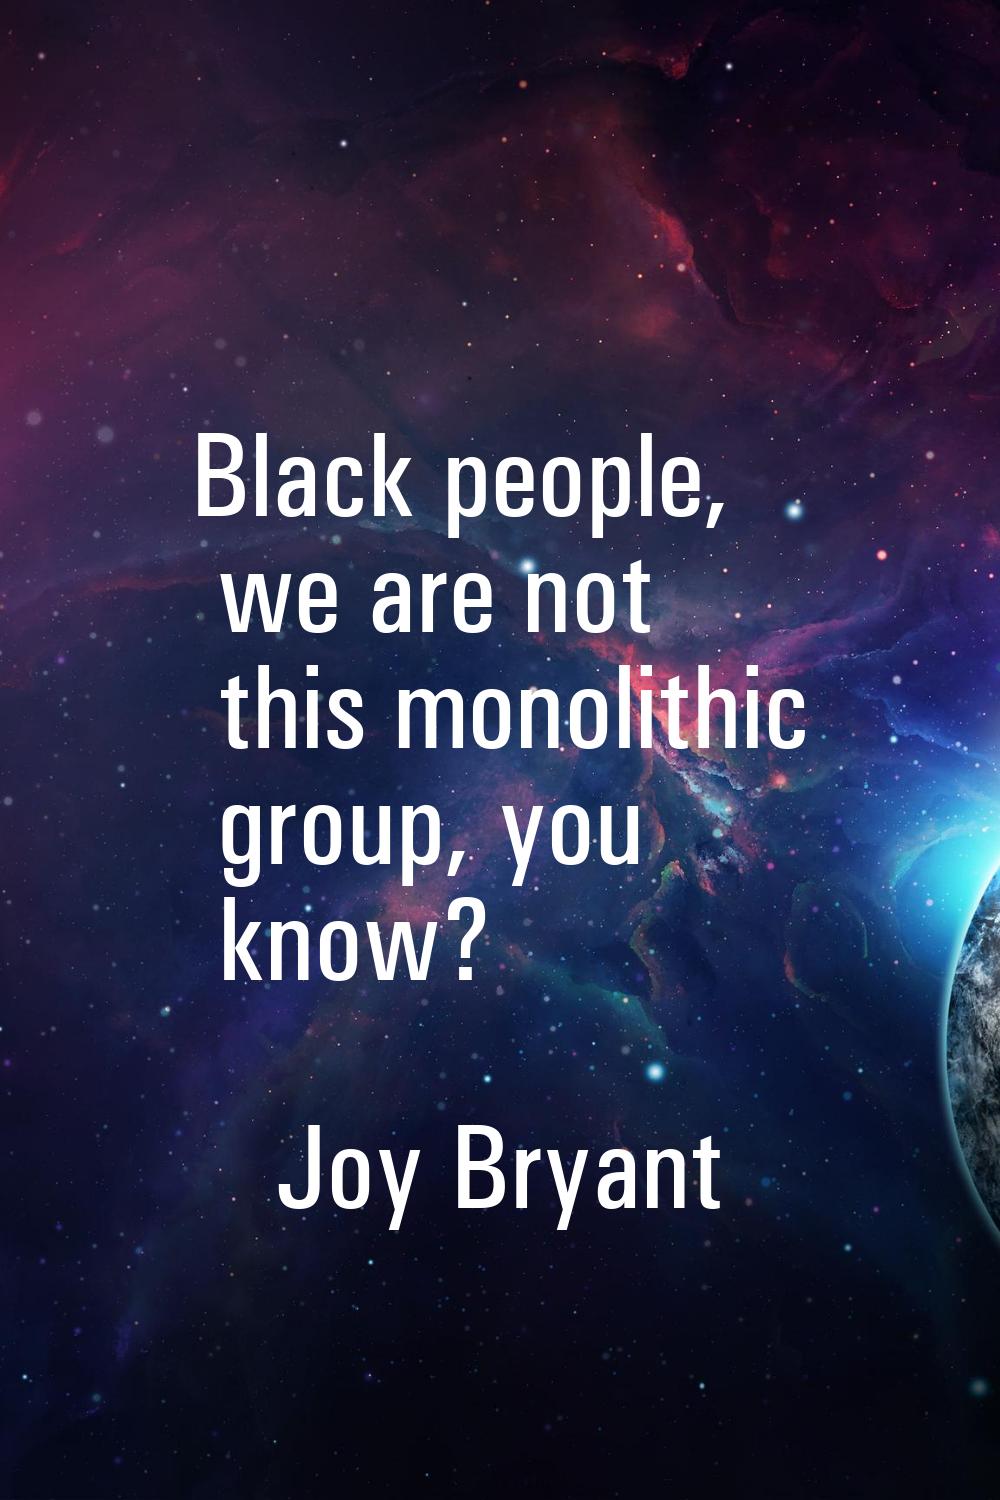 Black people, we are not this monolithic group, you know?